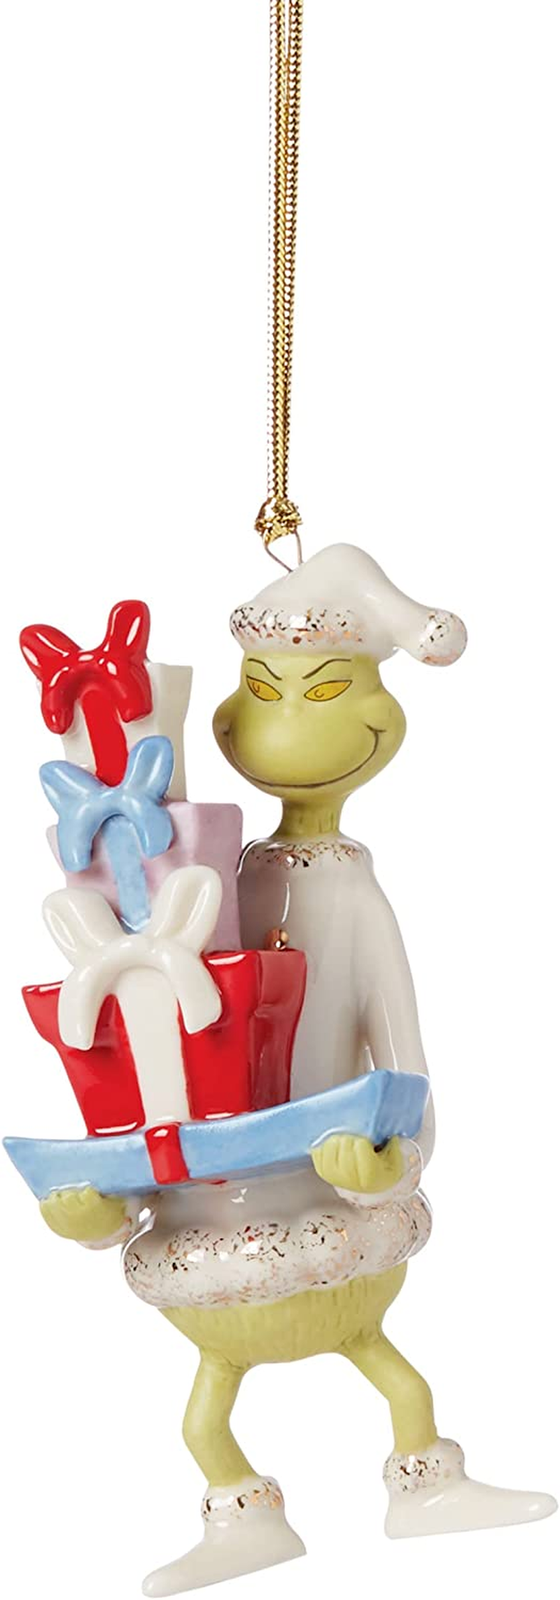 Primary image for Lenox Grinch With The Gifts Figurine Ornament Dr. Seuss Who Stole Christmas NEW